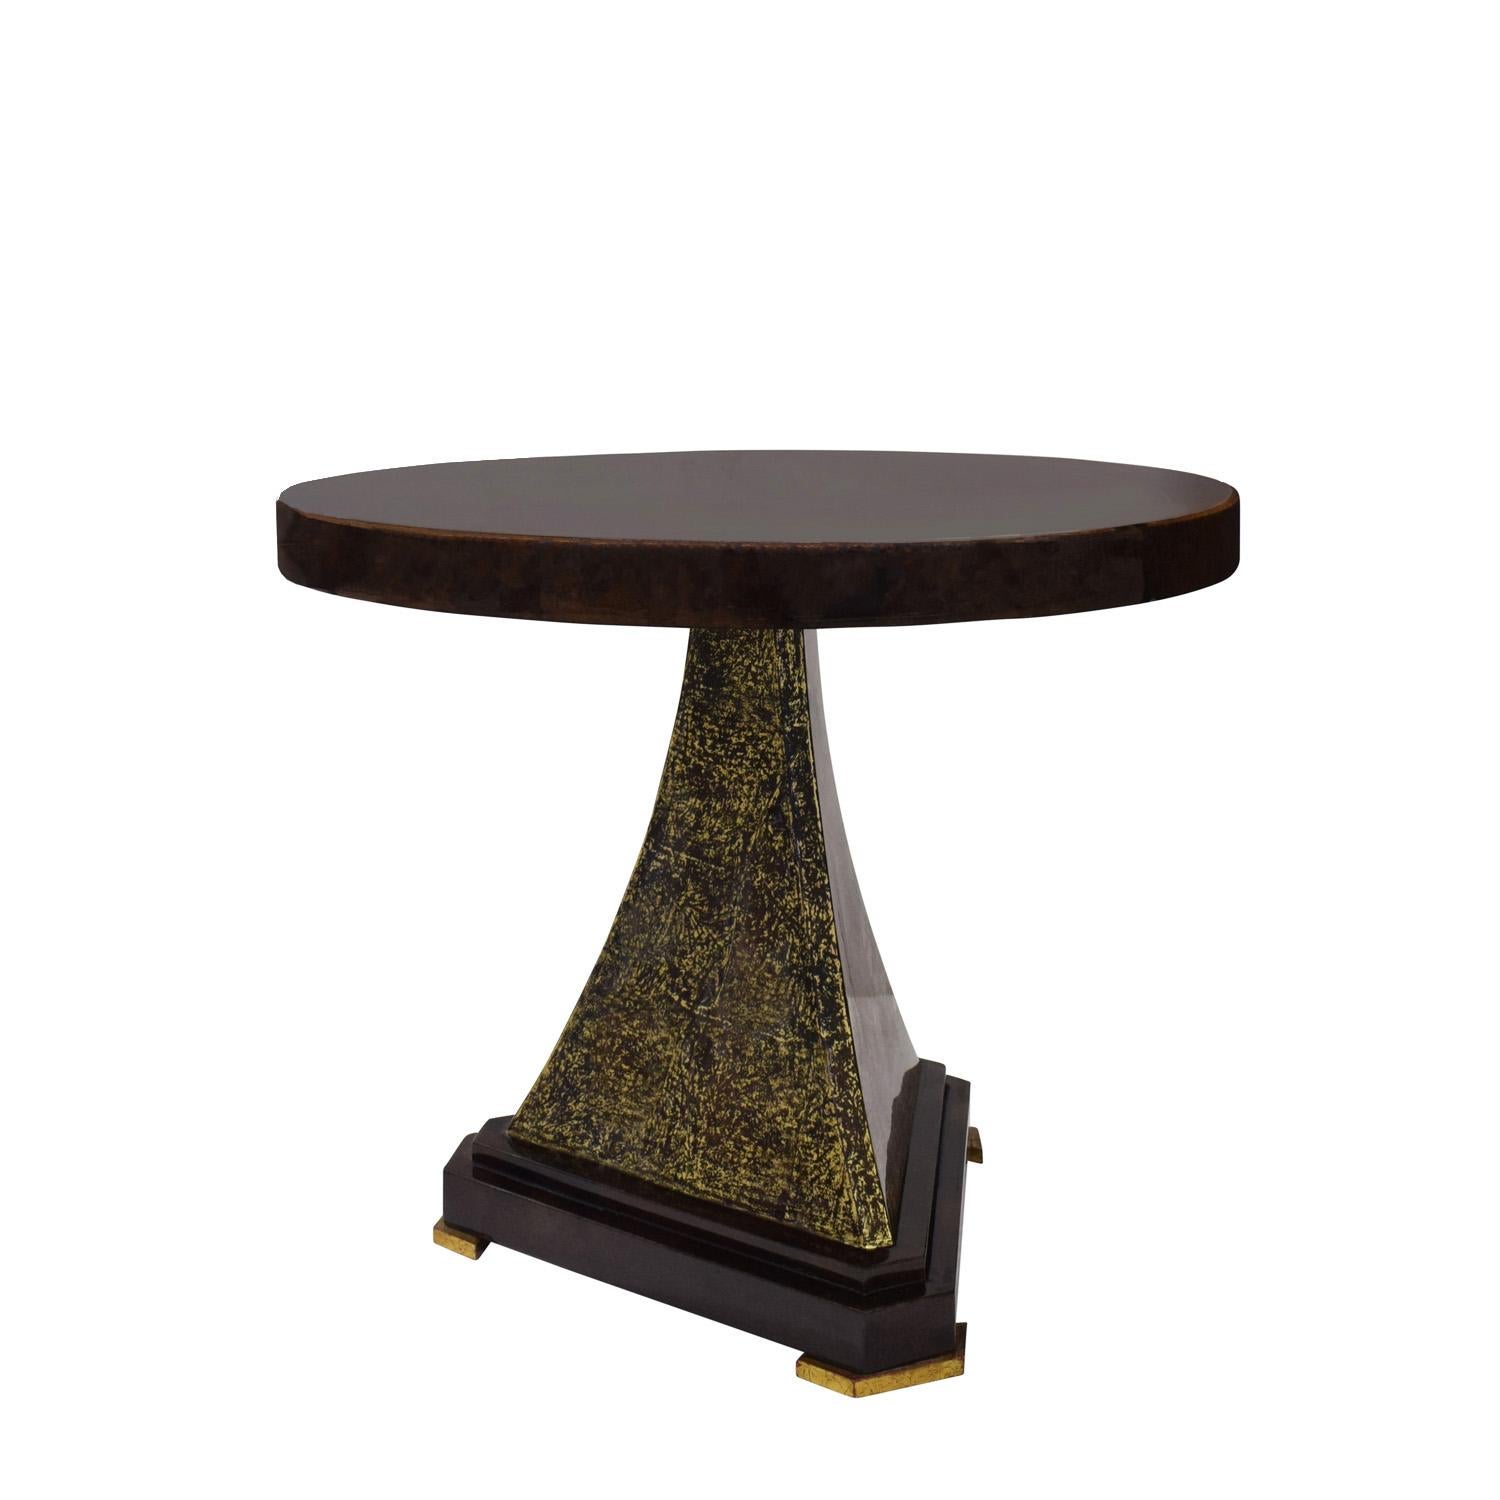 “Regency Side Table” in rich chocolate brown lacquered goatskin with pie-cut top, gold leaf overlay on pedestal section of base, and gilded feet by Karl Springer, American 1993. This is a luxuriously finished Springer piece and a unique work of